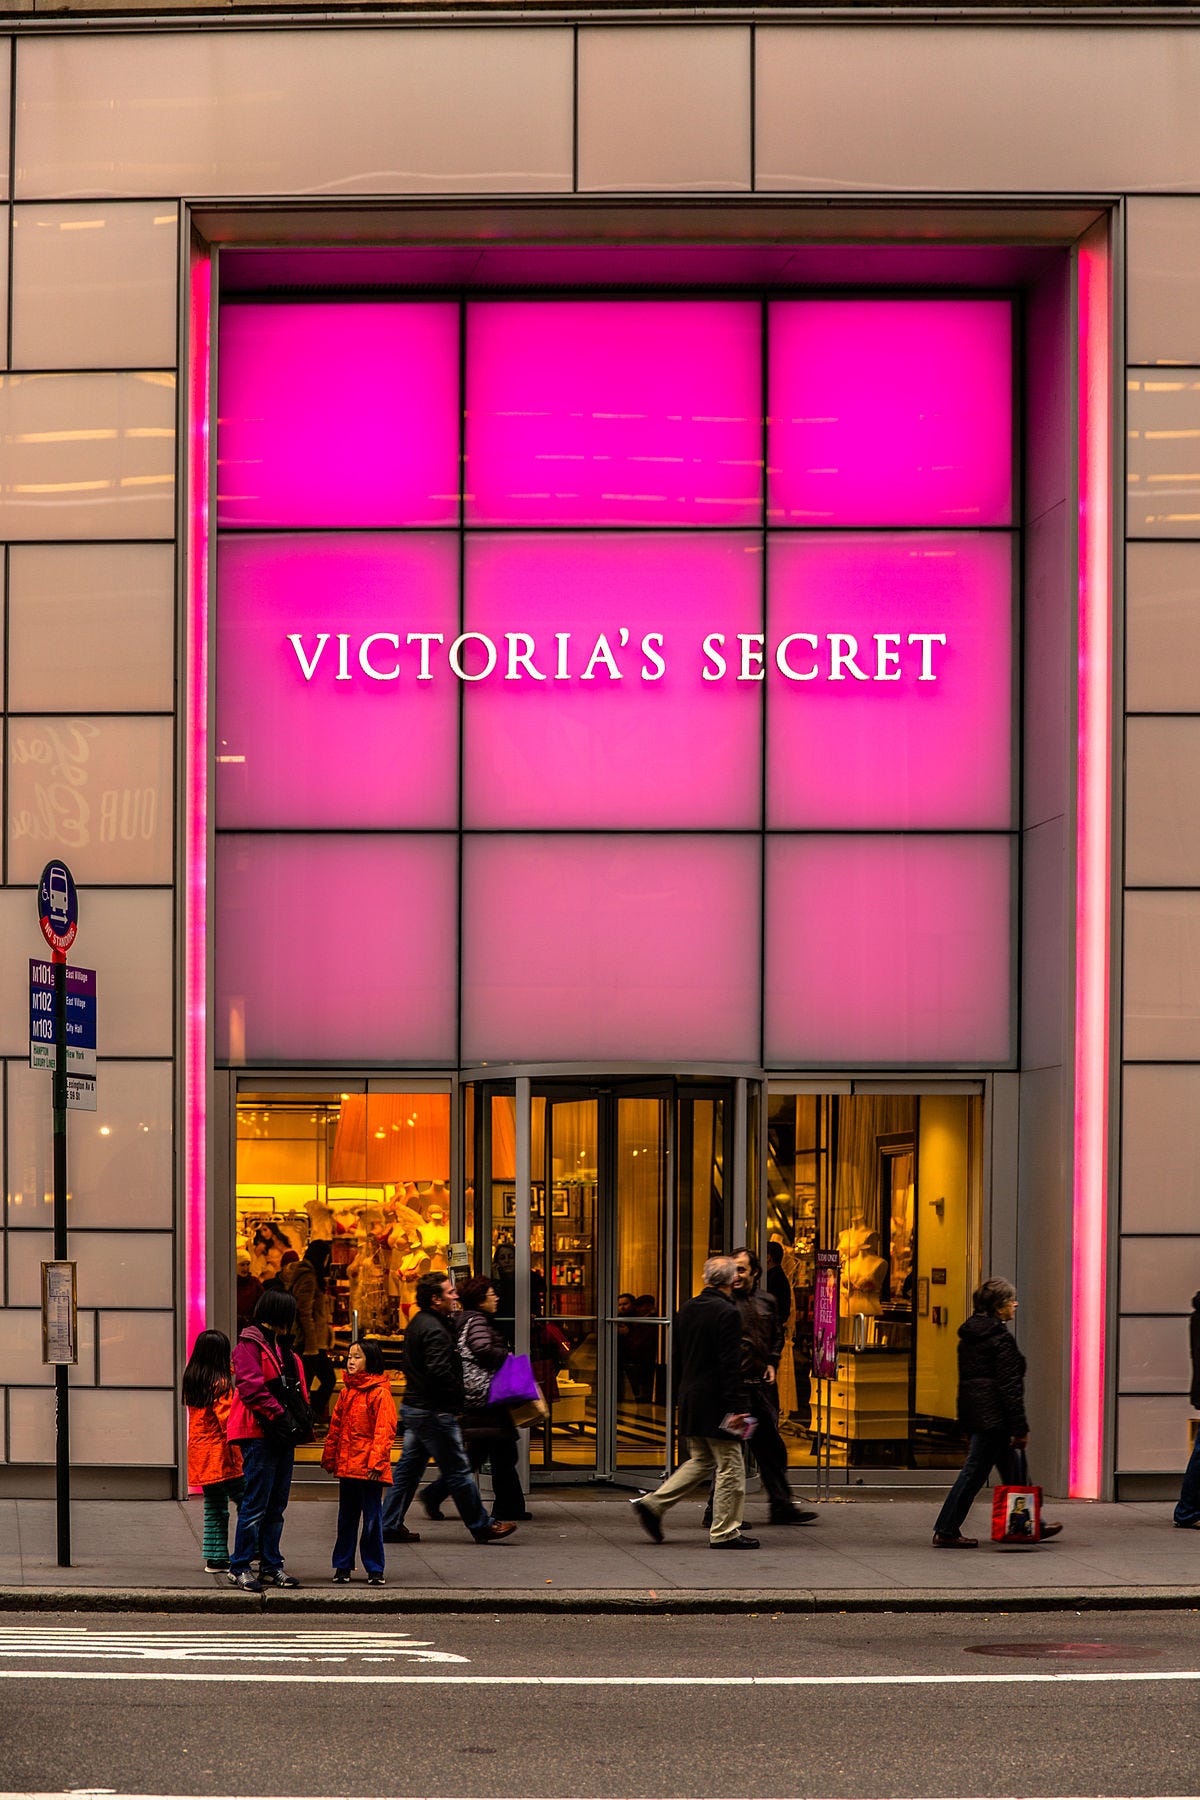 Is Victoria's Secret Planting Tracking Devices in Bras?